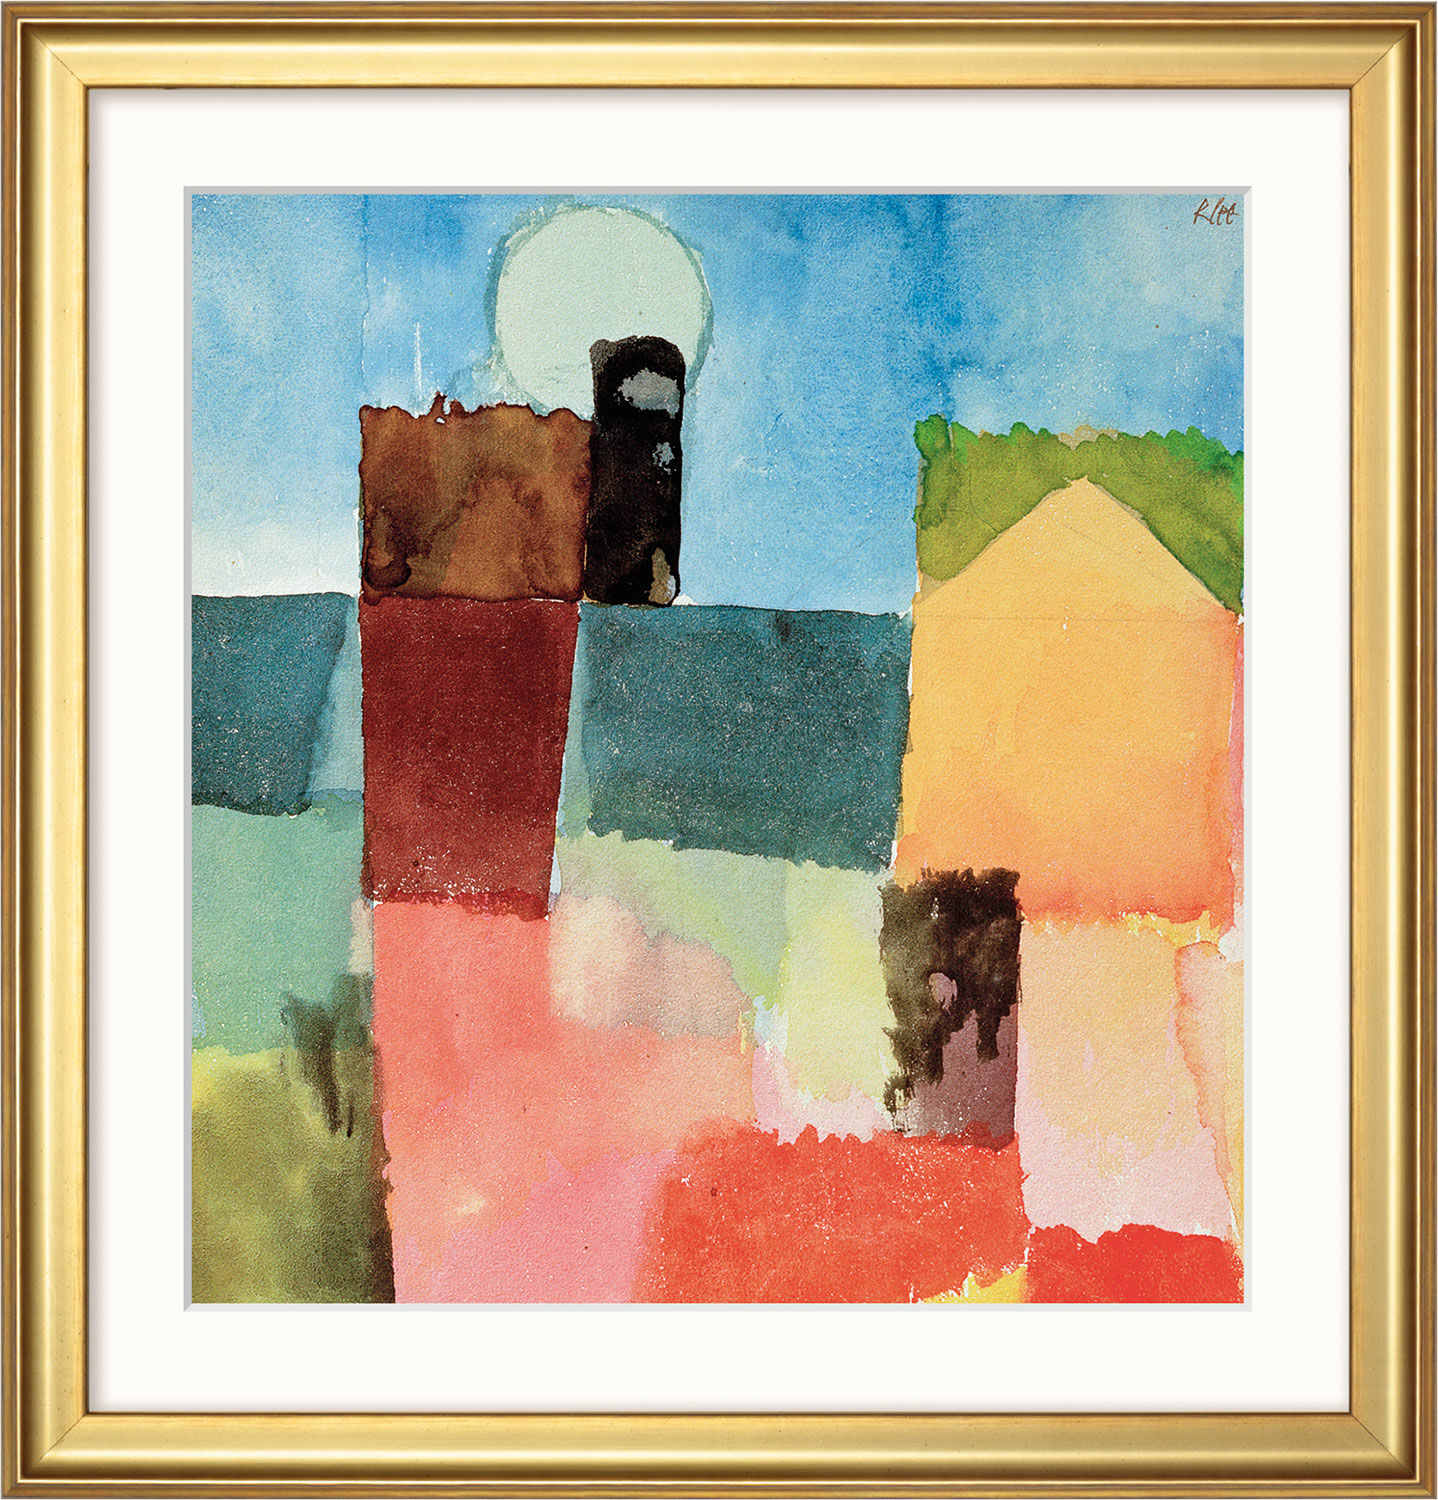 Picture "Moonrise over St. Germain" (1915), framed by Paul Klee